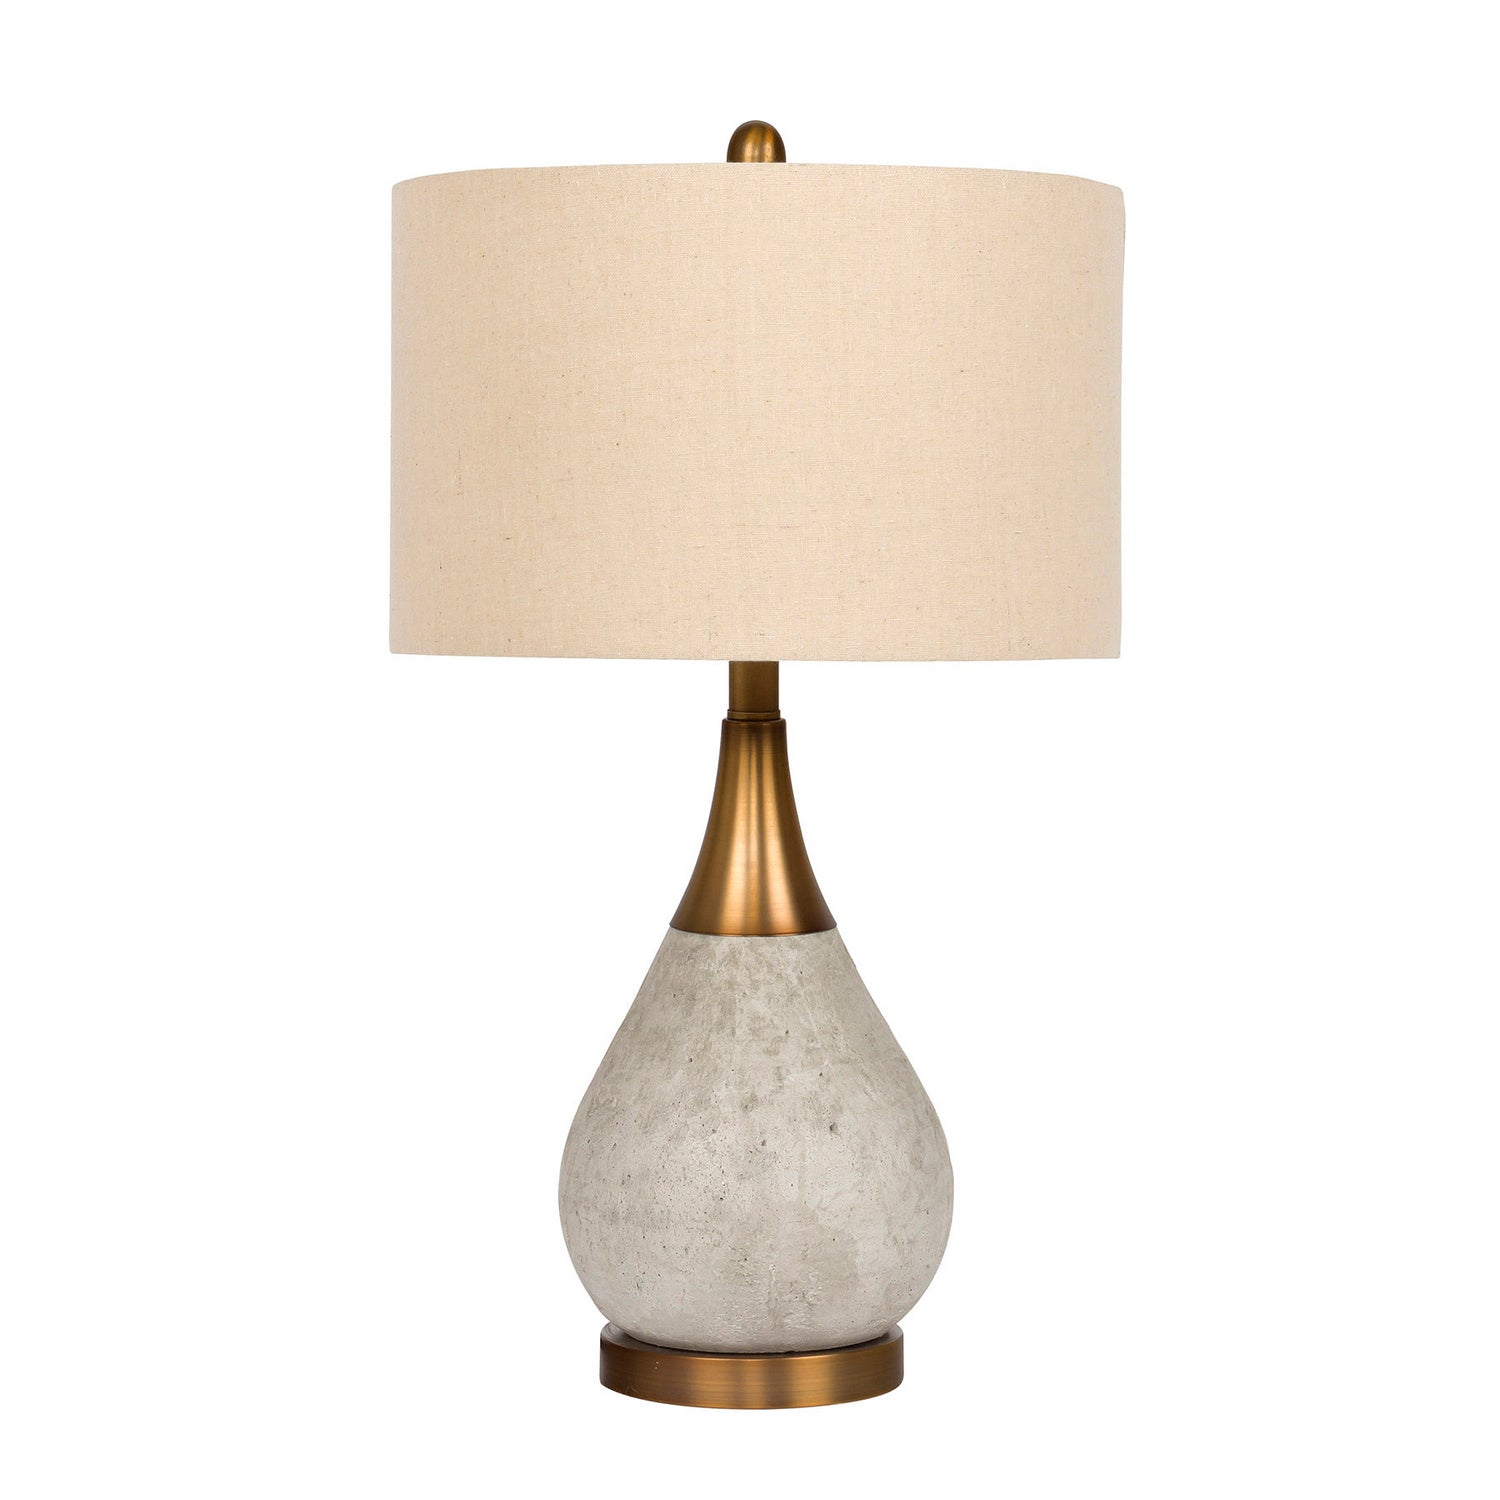 Craftmade Lighting 86237  Table Lamp Lamp Natural Concrete/Antique Brass